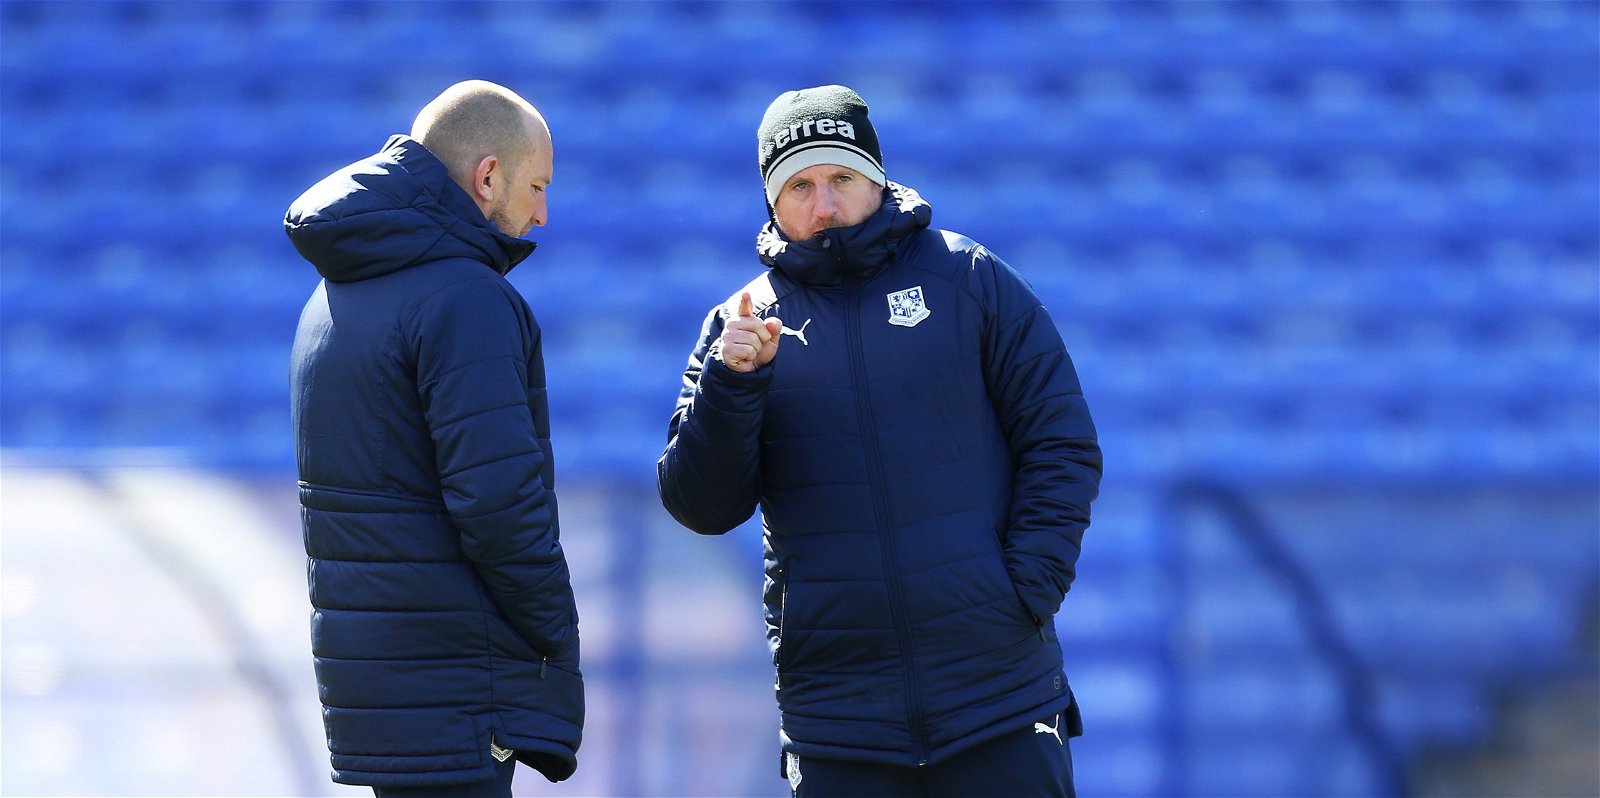 Tranmere Rovers, Five long-term candidates for the Tranmere Rovers job